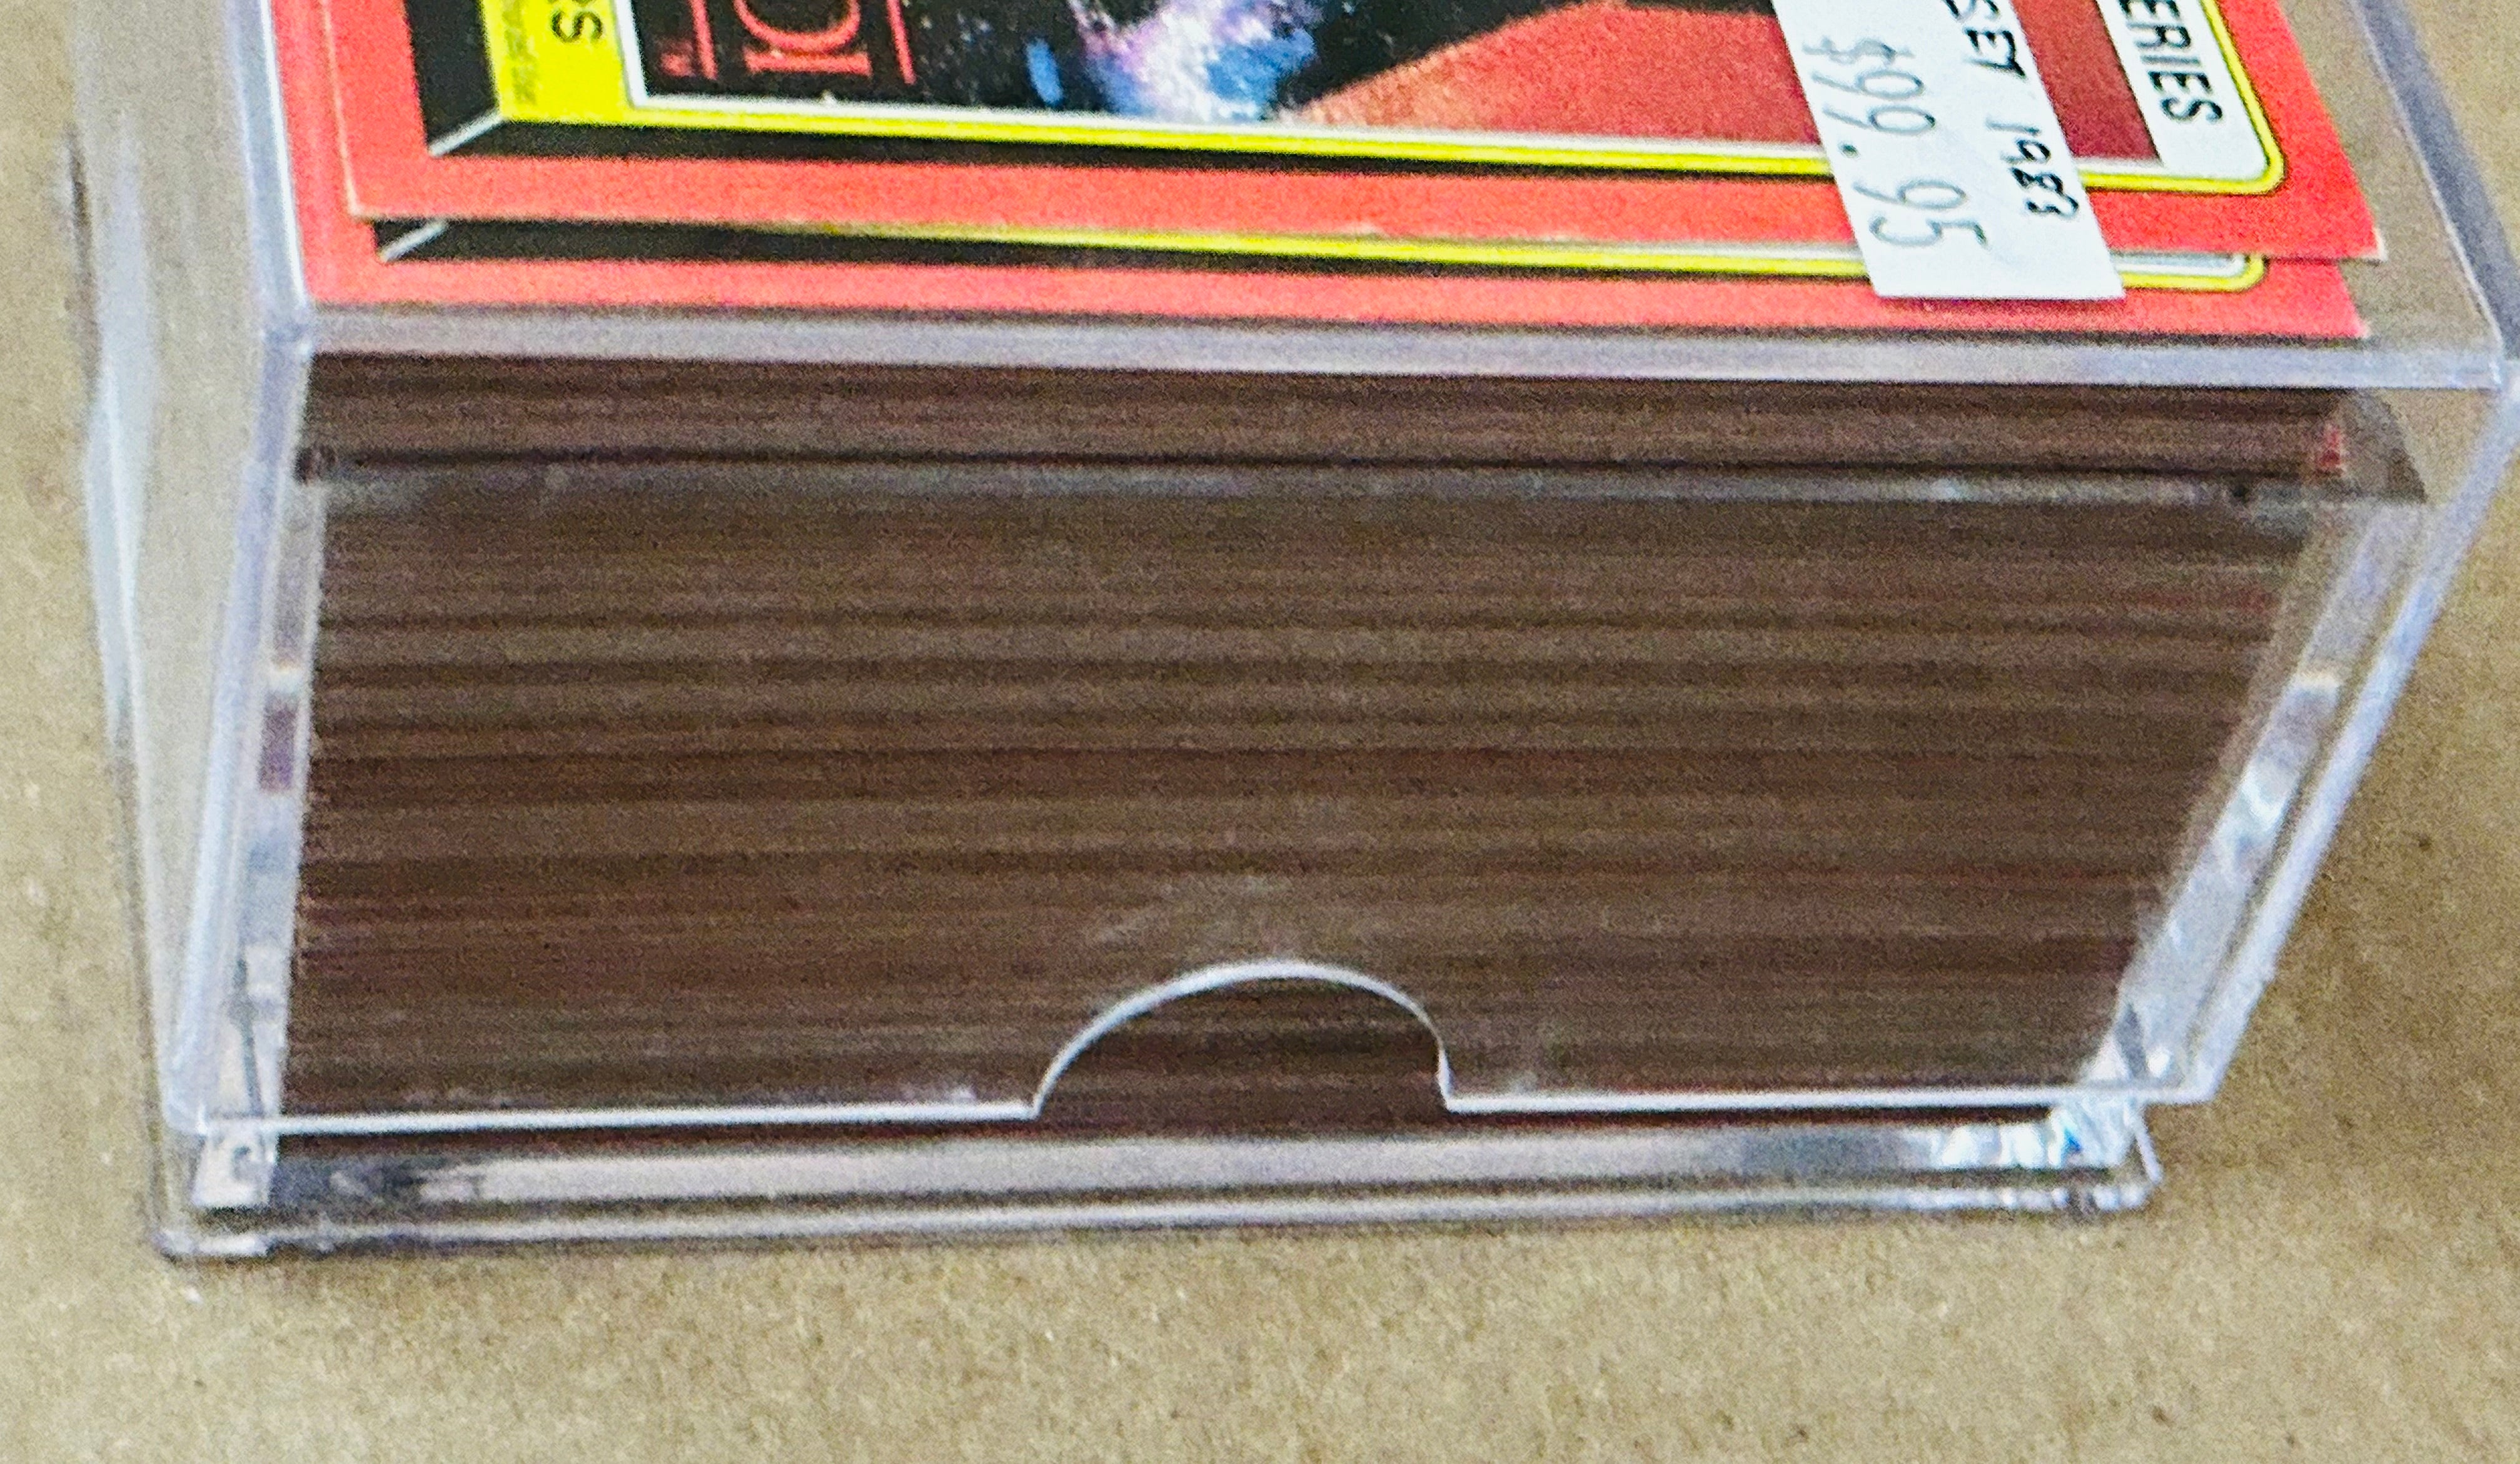 Star Wars Return of the Jedi Topps high grade condition cards set 1983